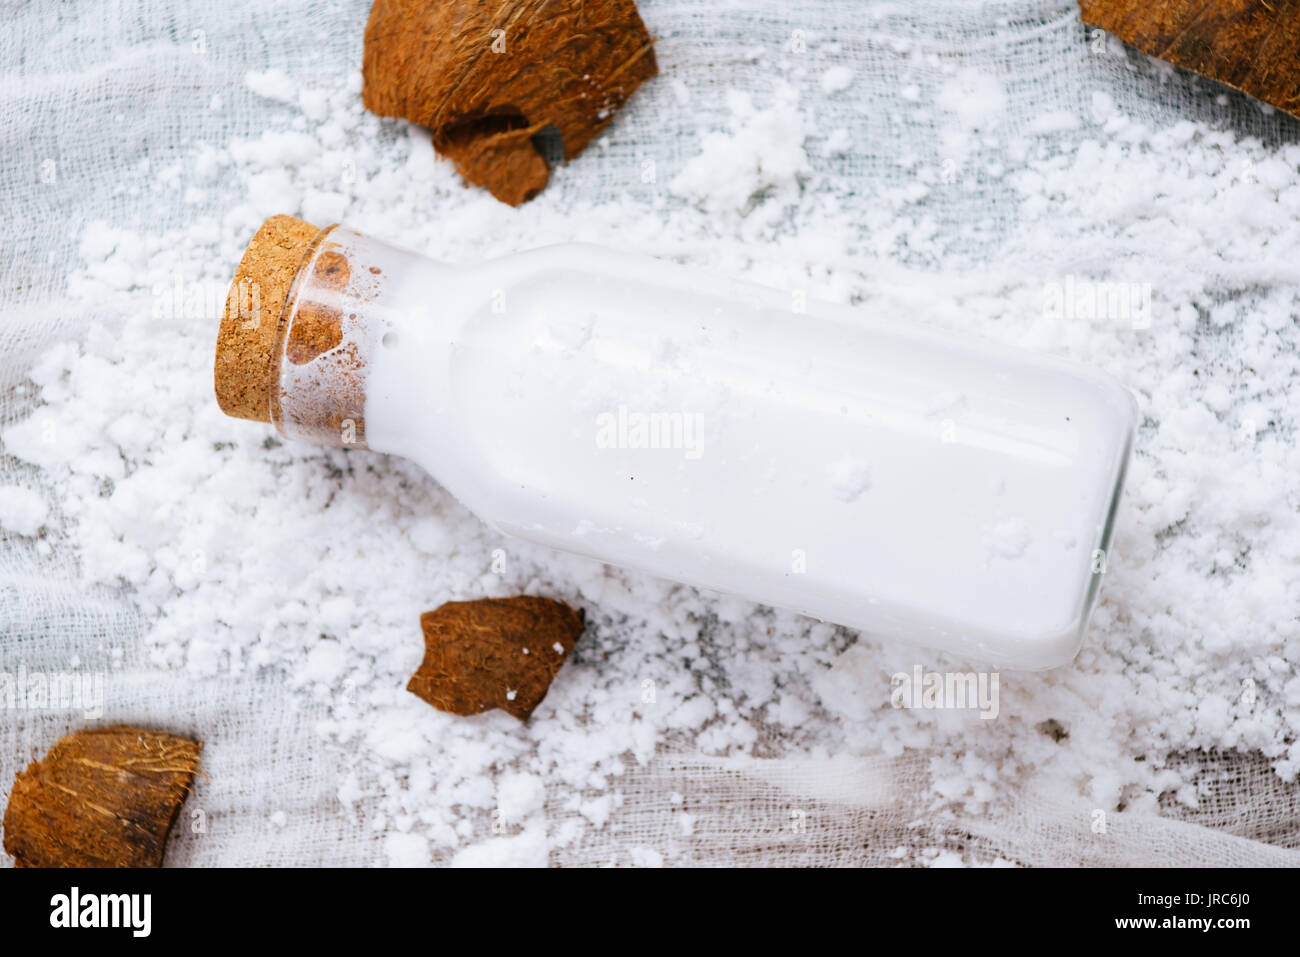 Homemade coconut milk in a bottle, mixed in a blender and pressed through a cotton sieve, over a coconut essicated powder on a white background Stock Photo